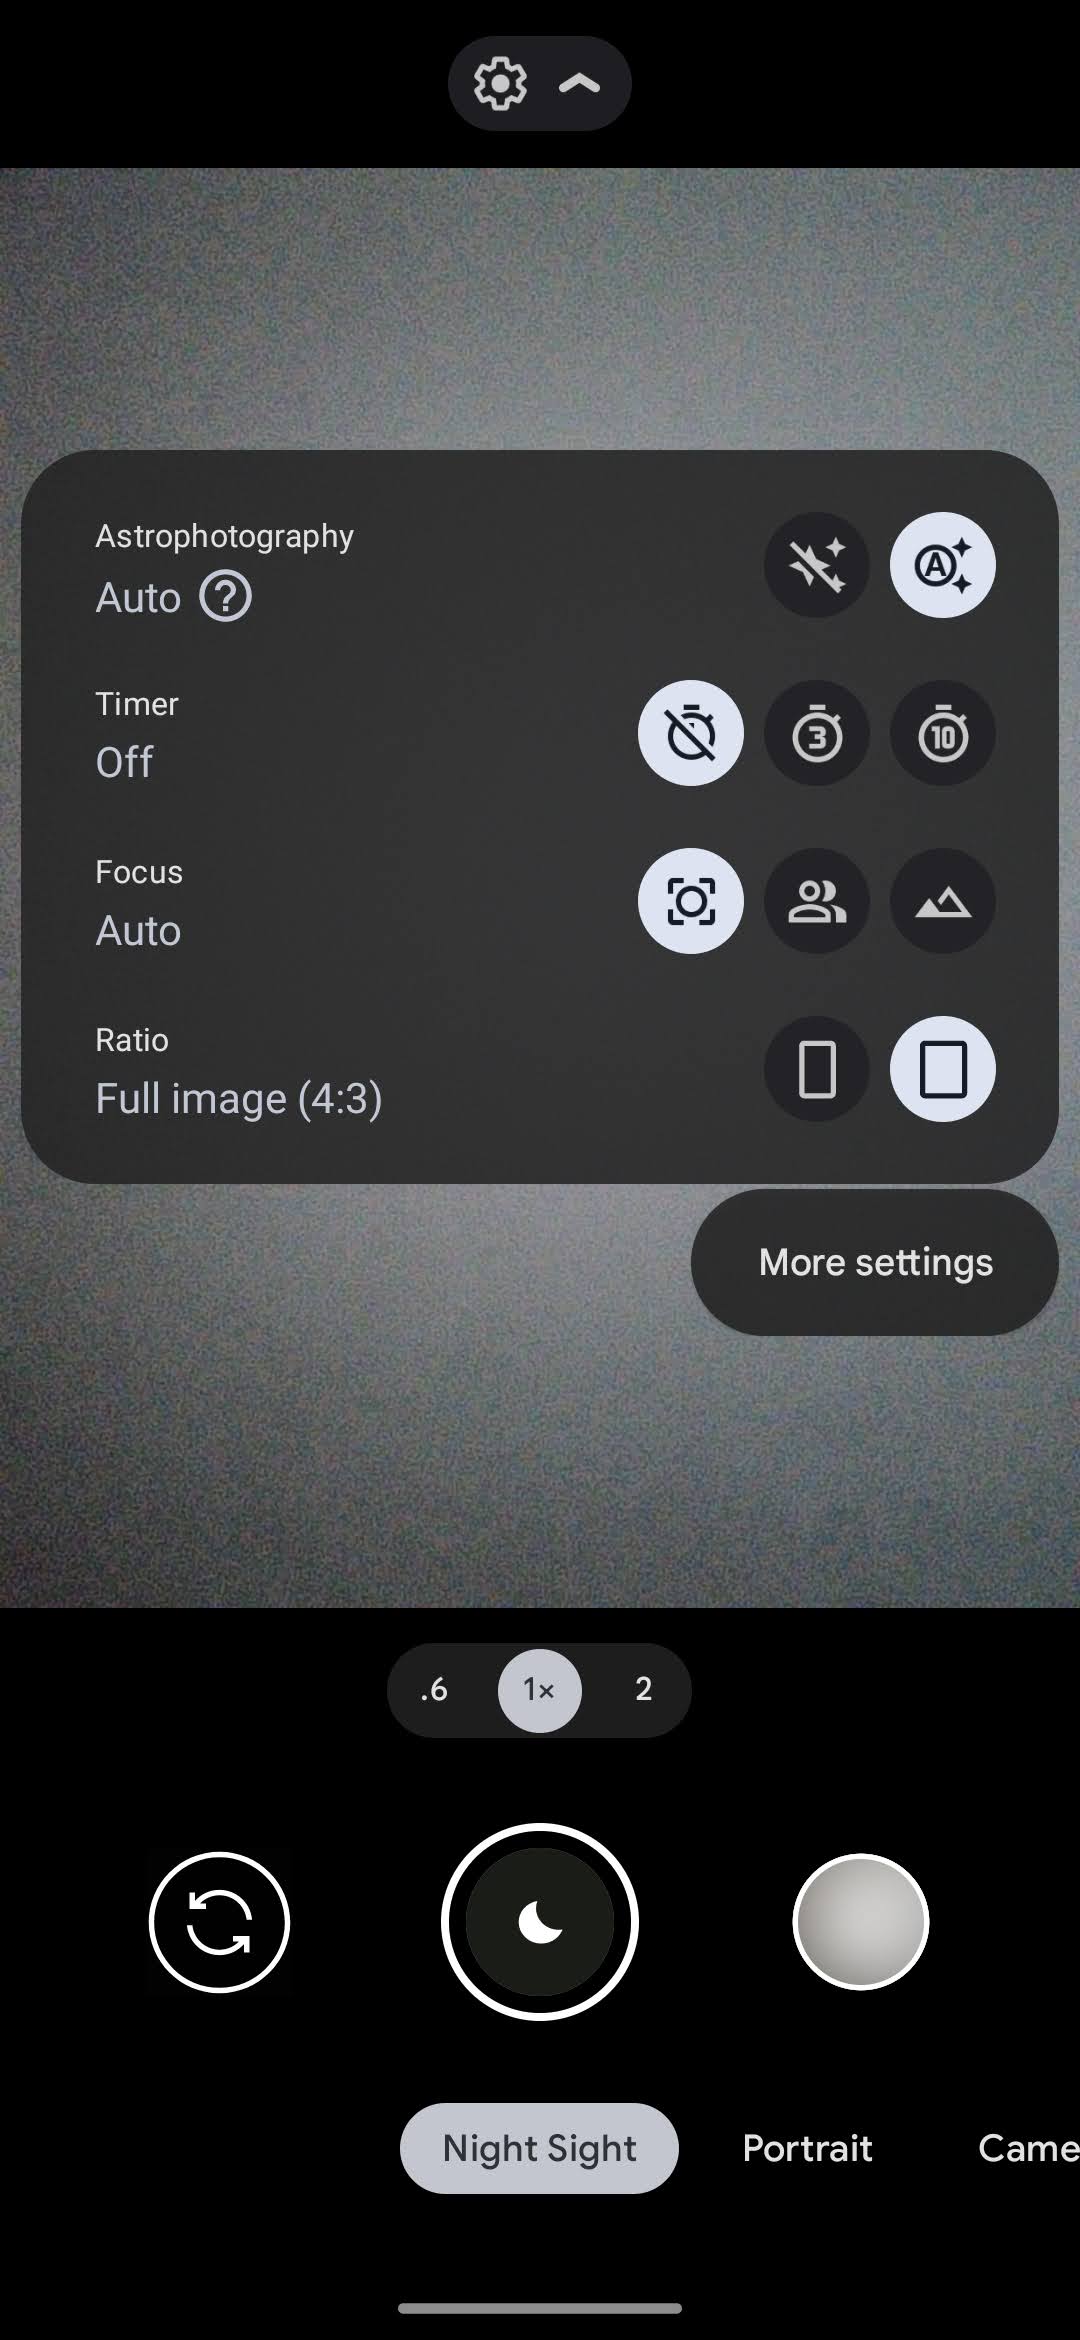 Enable Astrophotography mode on Pixel 2